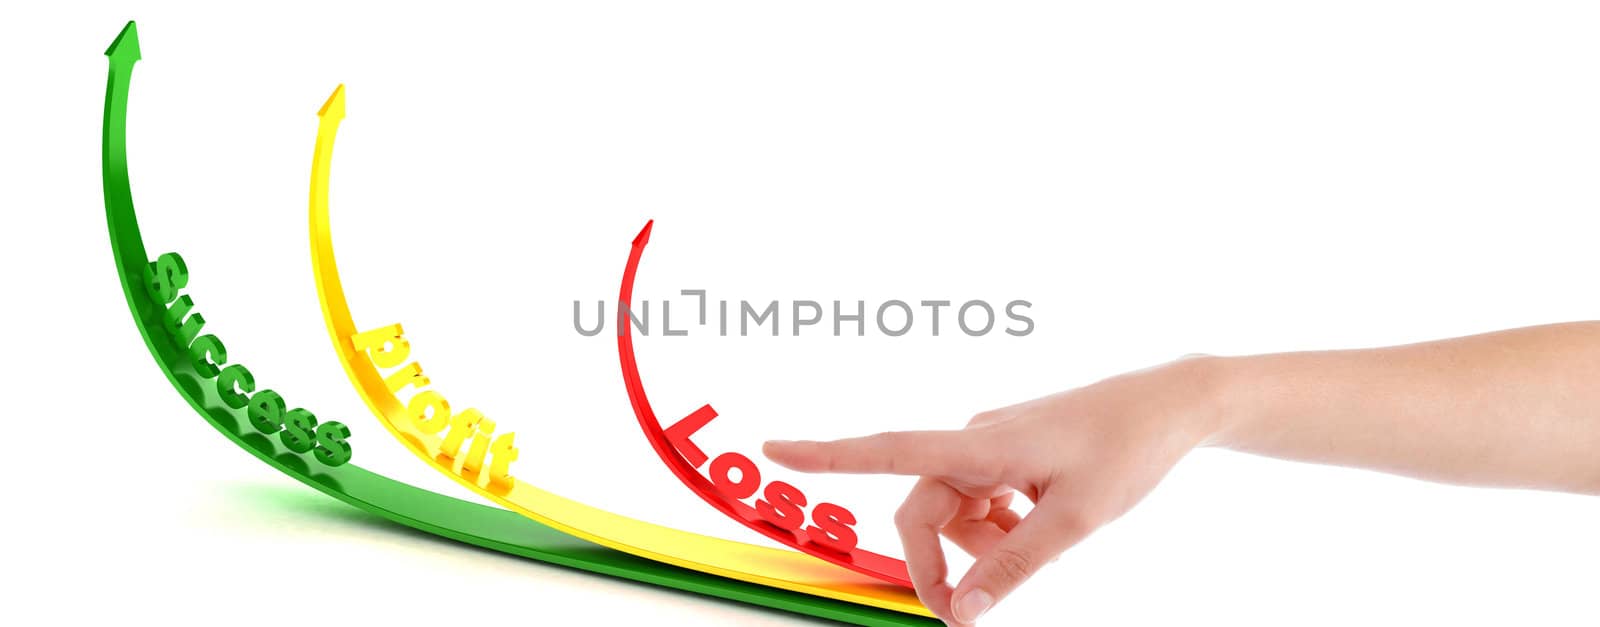 pointing hand gesture with profit and loss arrows by imagerymajestic